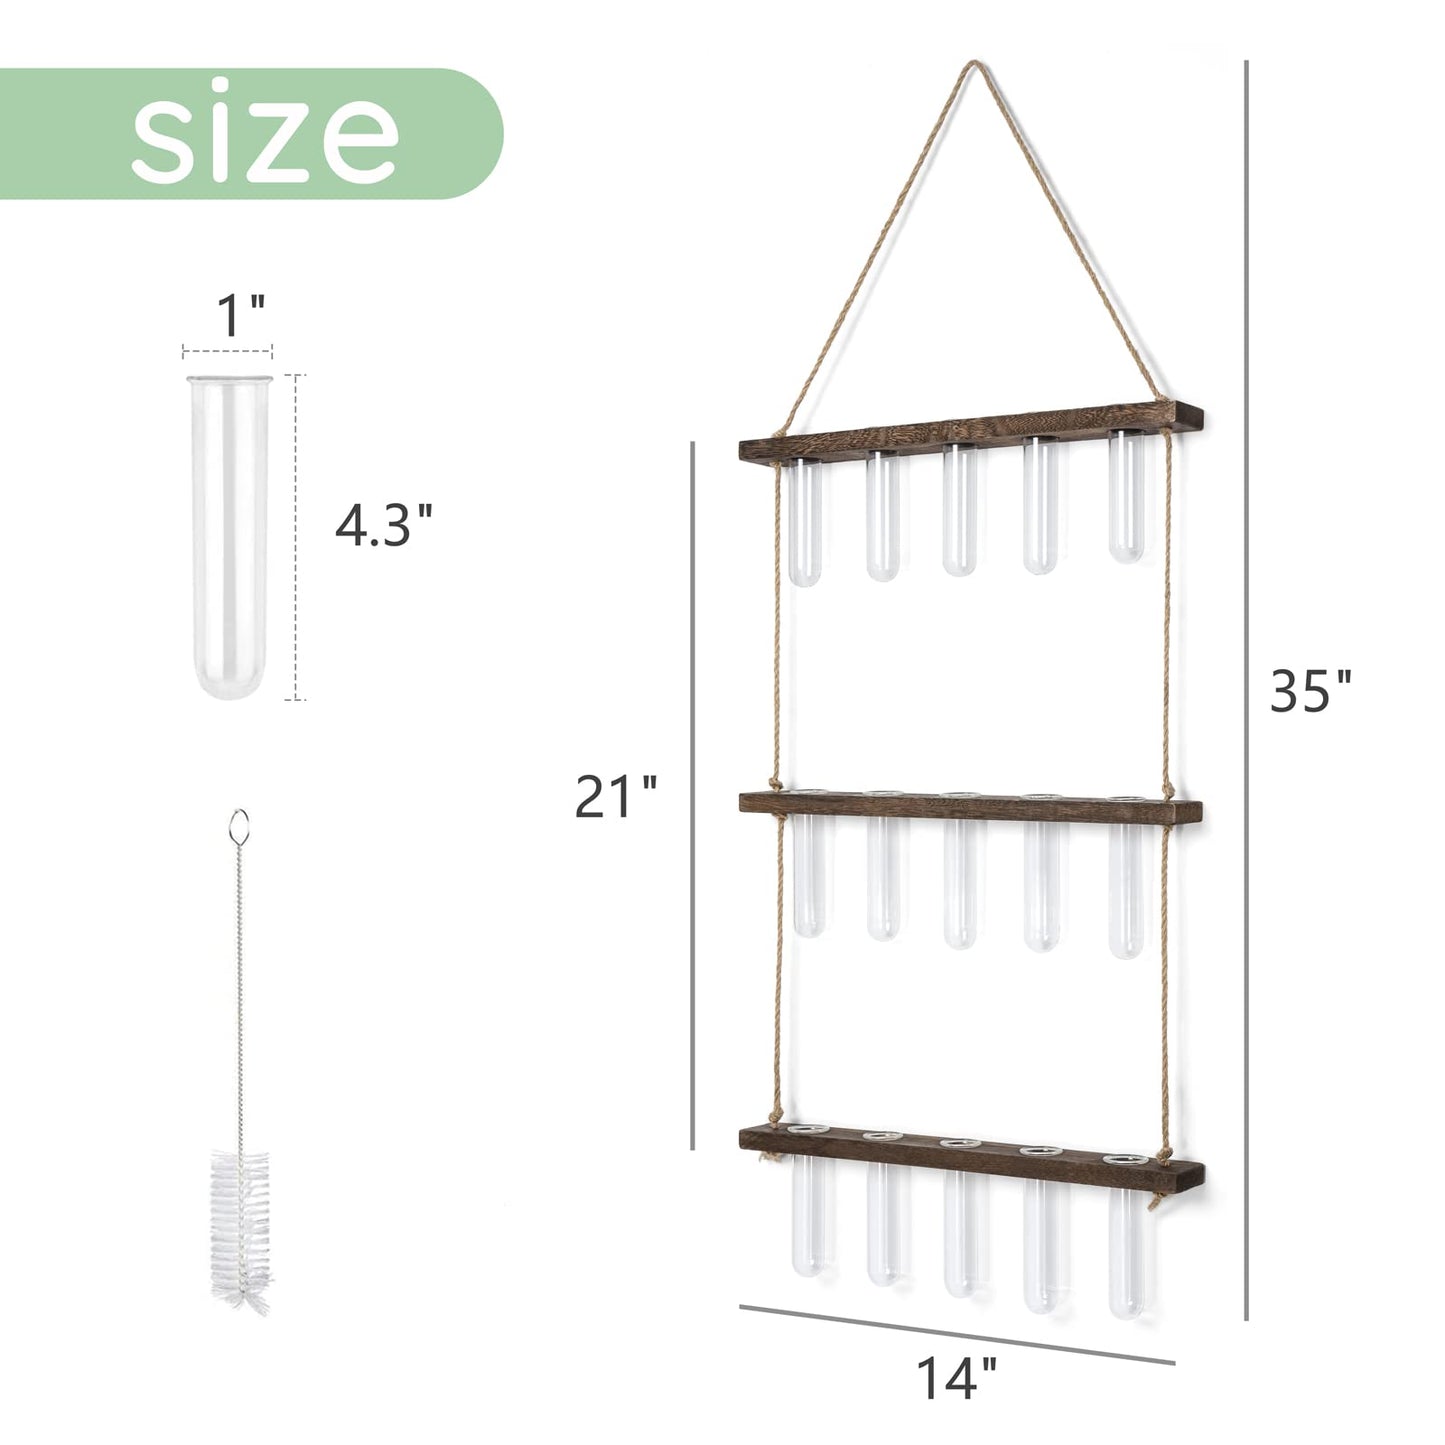 Mkono Plant Propagation Tubes, 3 Tiered Wall Hanging Terrarium with Wooden Stand Mini Test Tube Flower Vase Glass Planter Stations for Hydroponic Cutting Home Garden Office Decor Plant Lover Gift - Plantonio